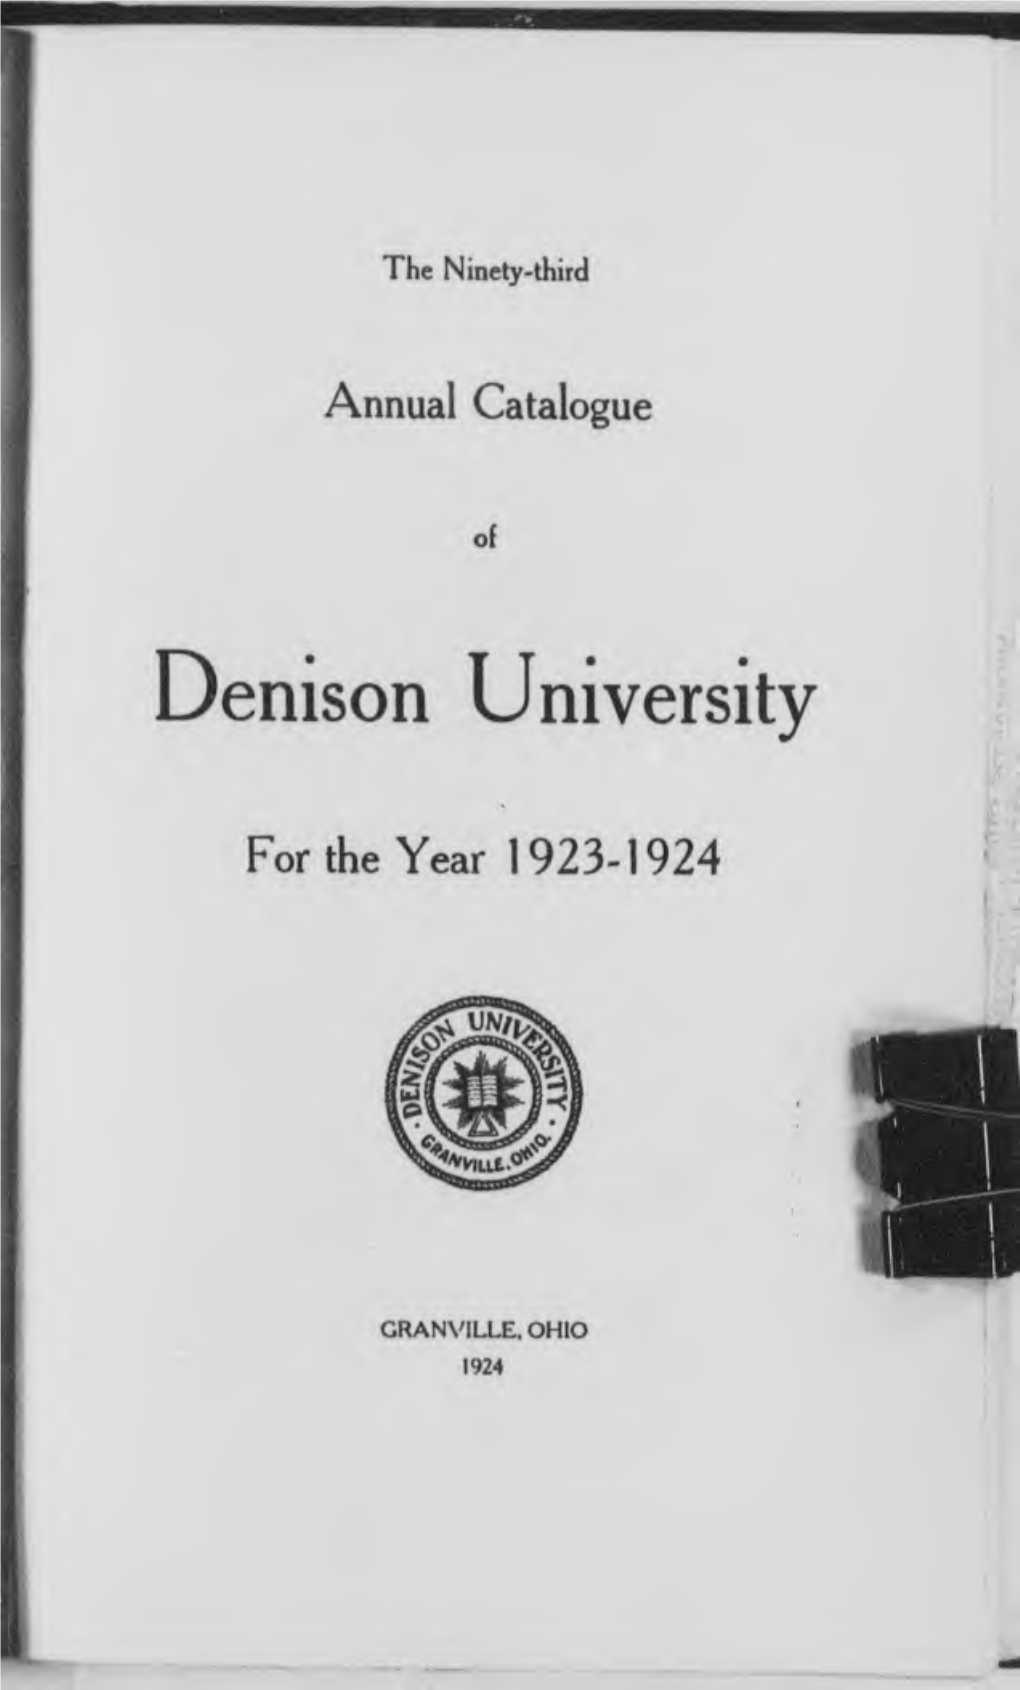 The Ninety-Third Annual Catalogue of Denison University for the Year